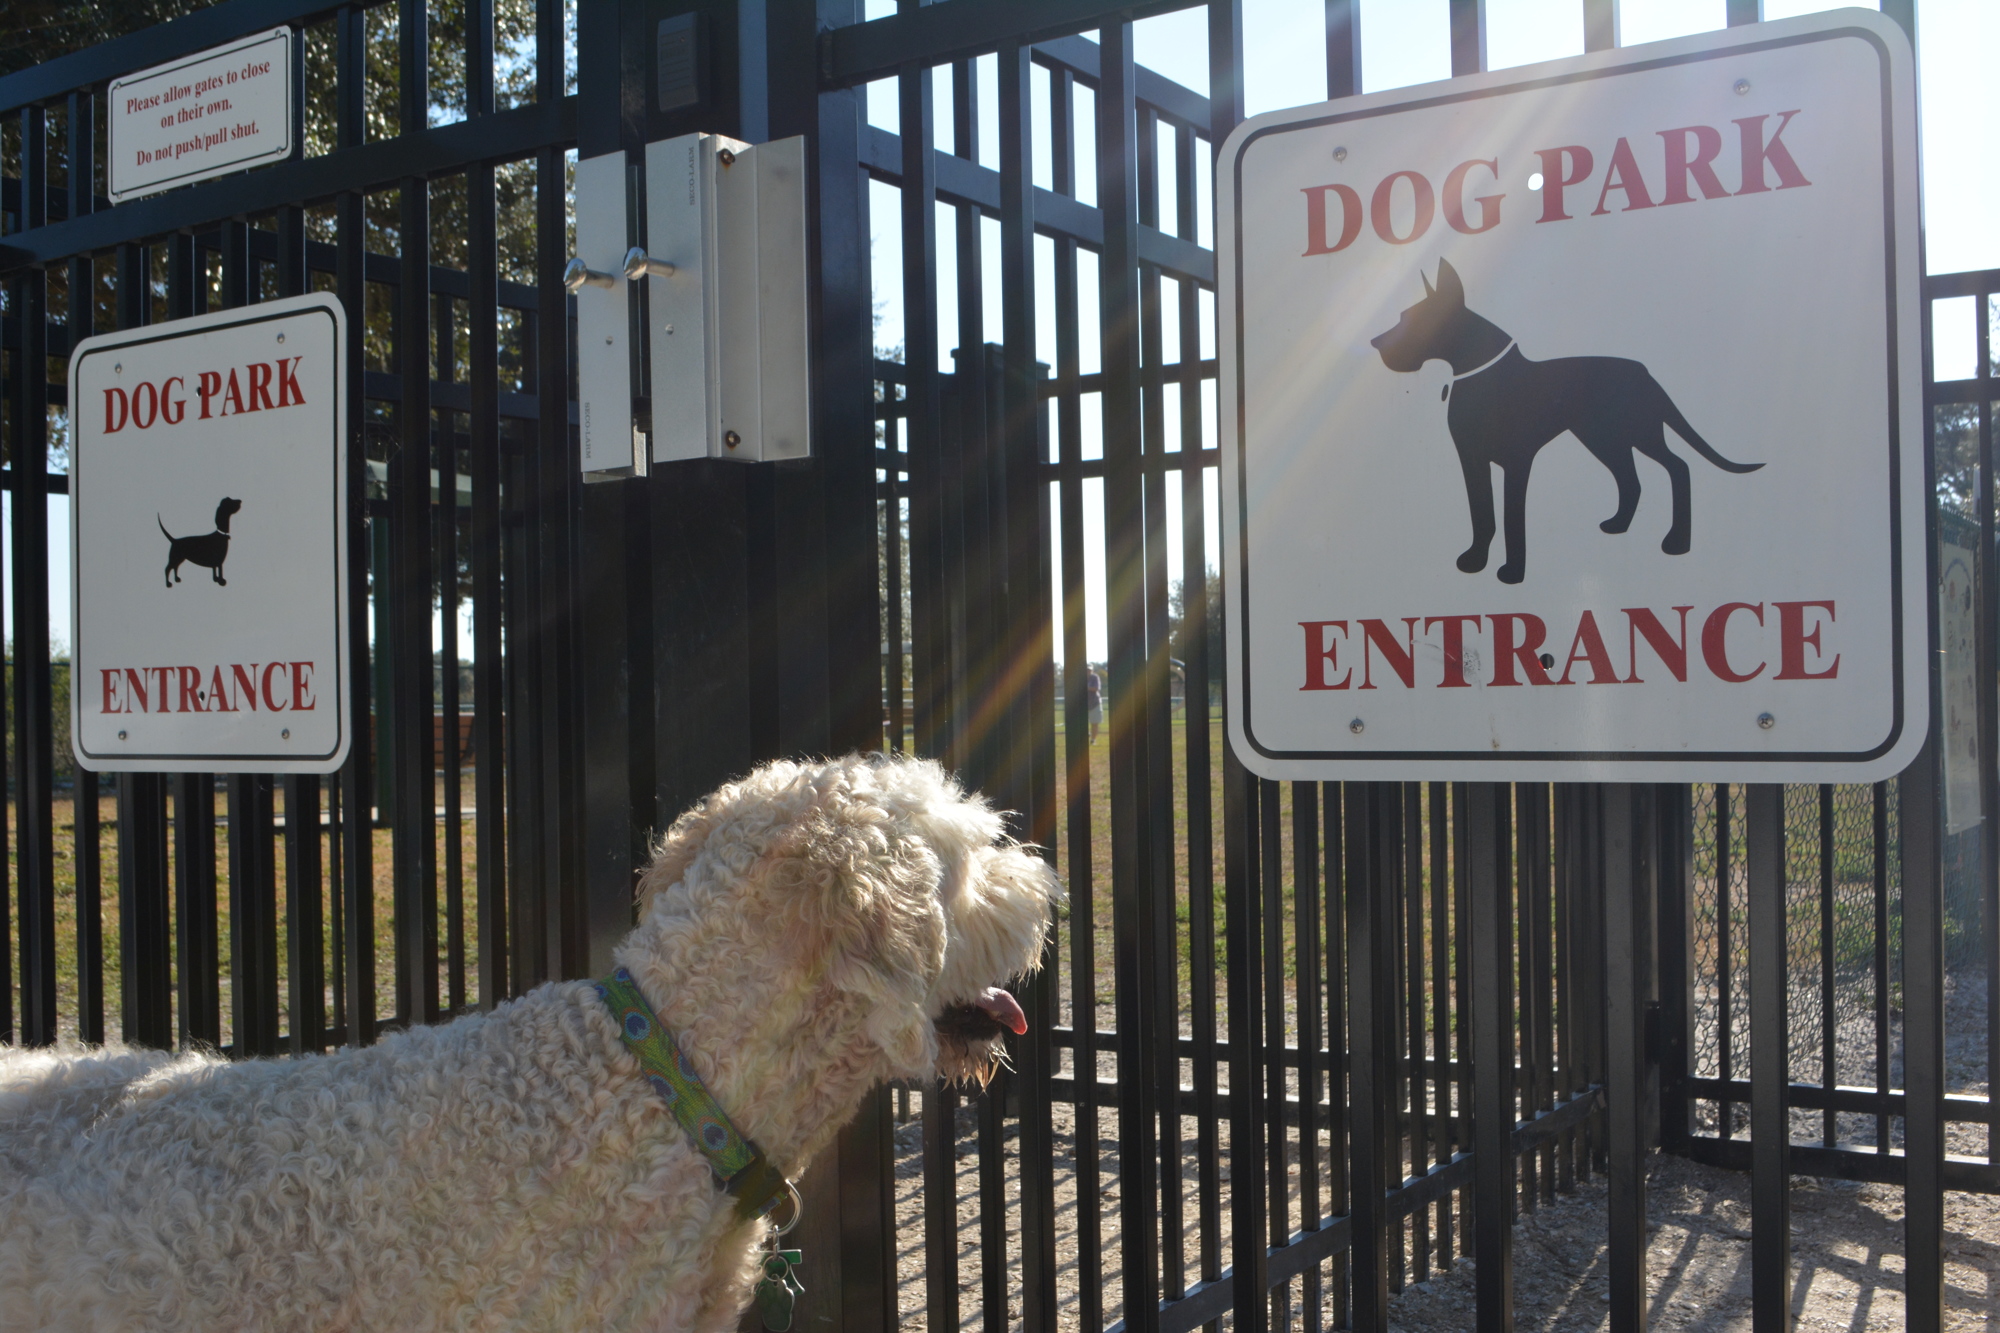 Izzie, a 7-year-old golden doodle, wants to get inside the Paws Park.